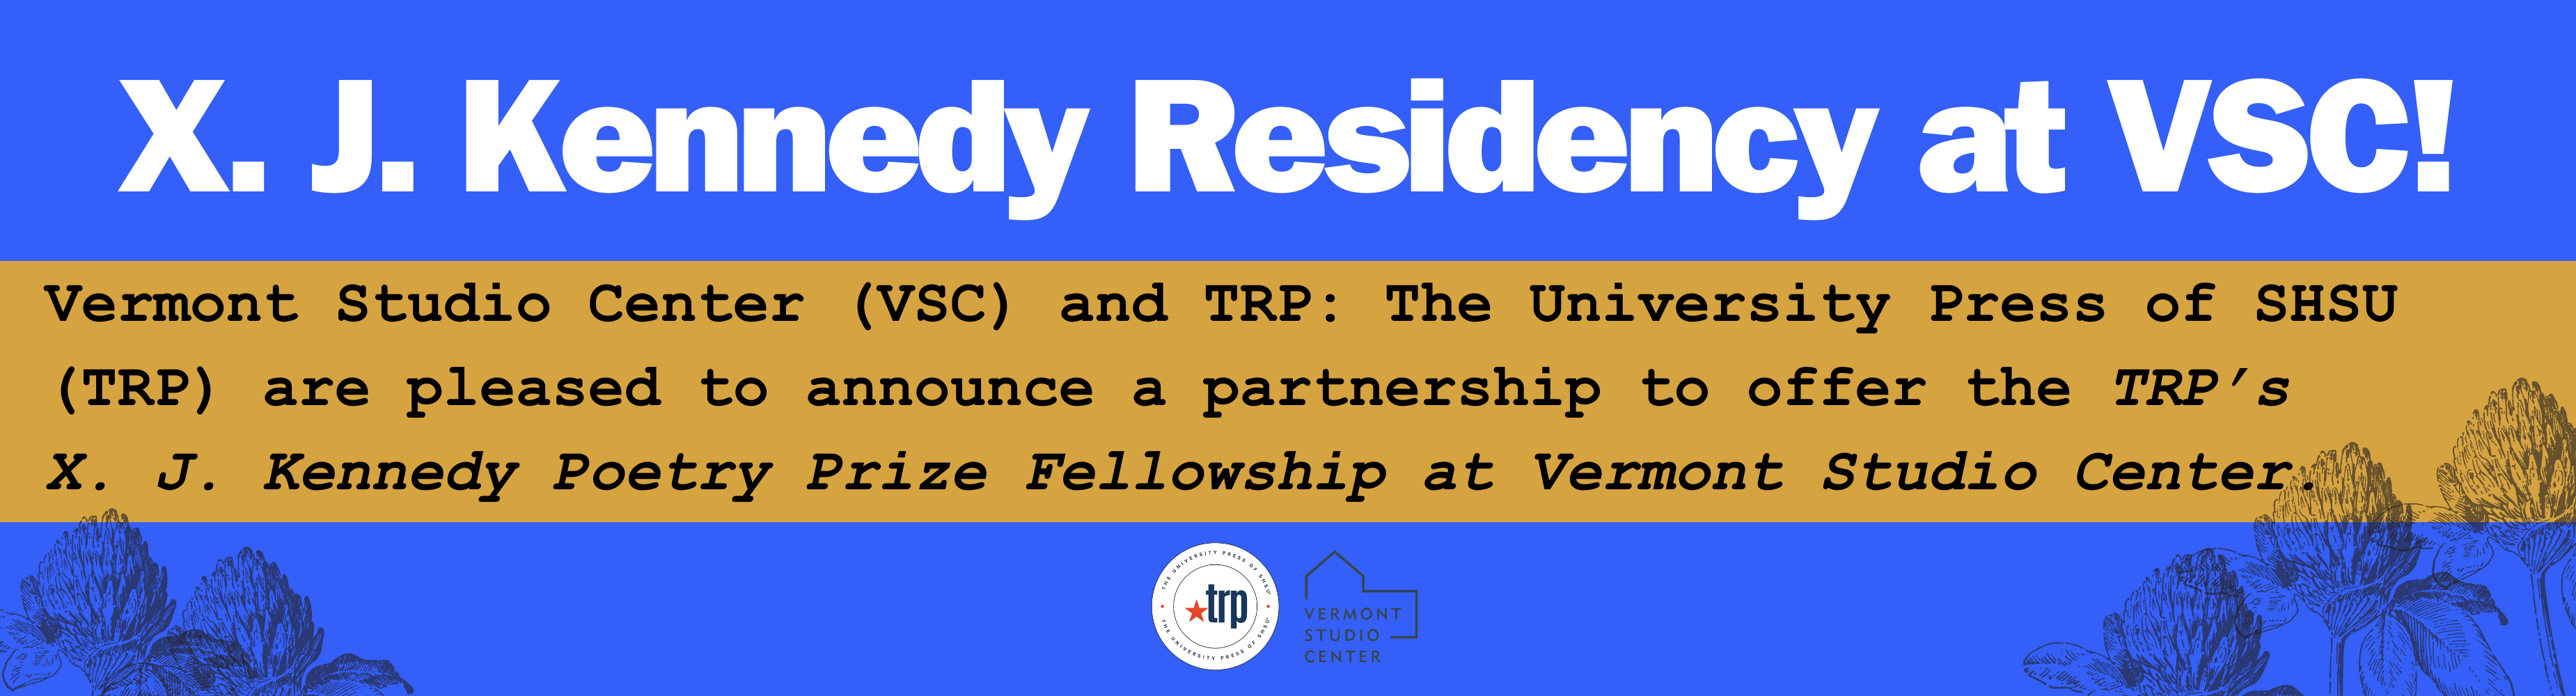 Vermont Studio Center (VSC) and TRP: The University Press of SHSU (TRP) are pleased to announce a partnership to offer the TRP’s X. J. Kennedy Poetry Prize Fellowship at Vermont Studio Center.